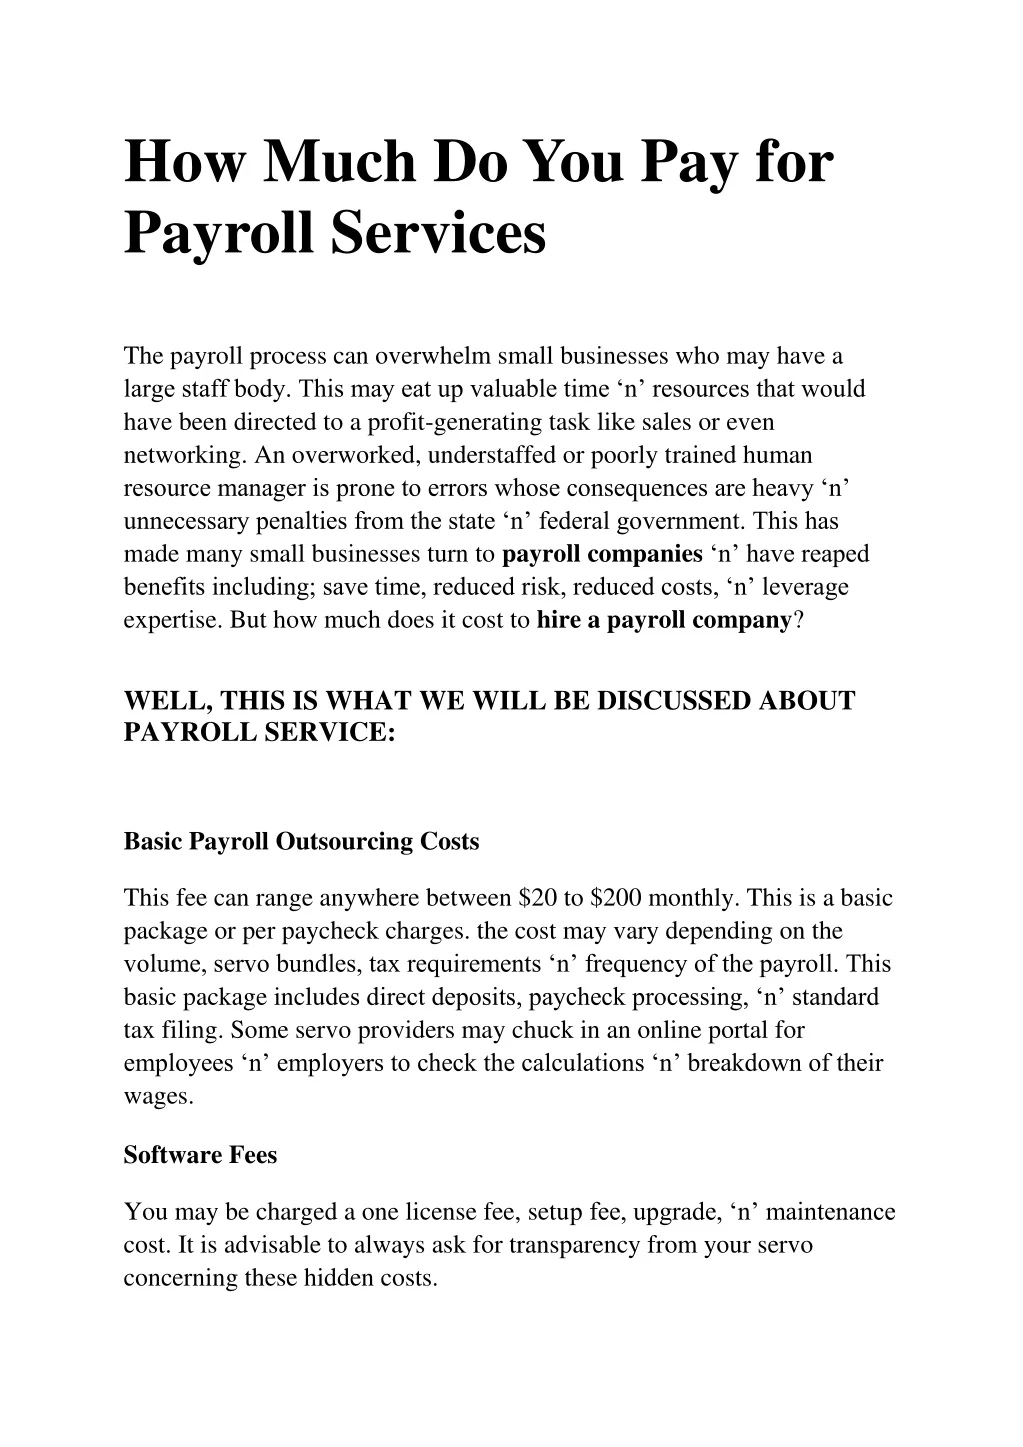 how much do you pay for payroll services